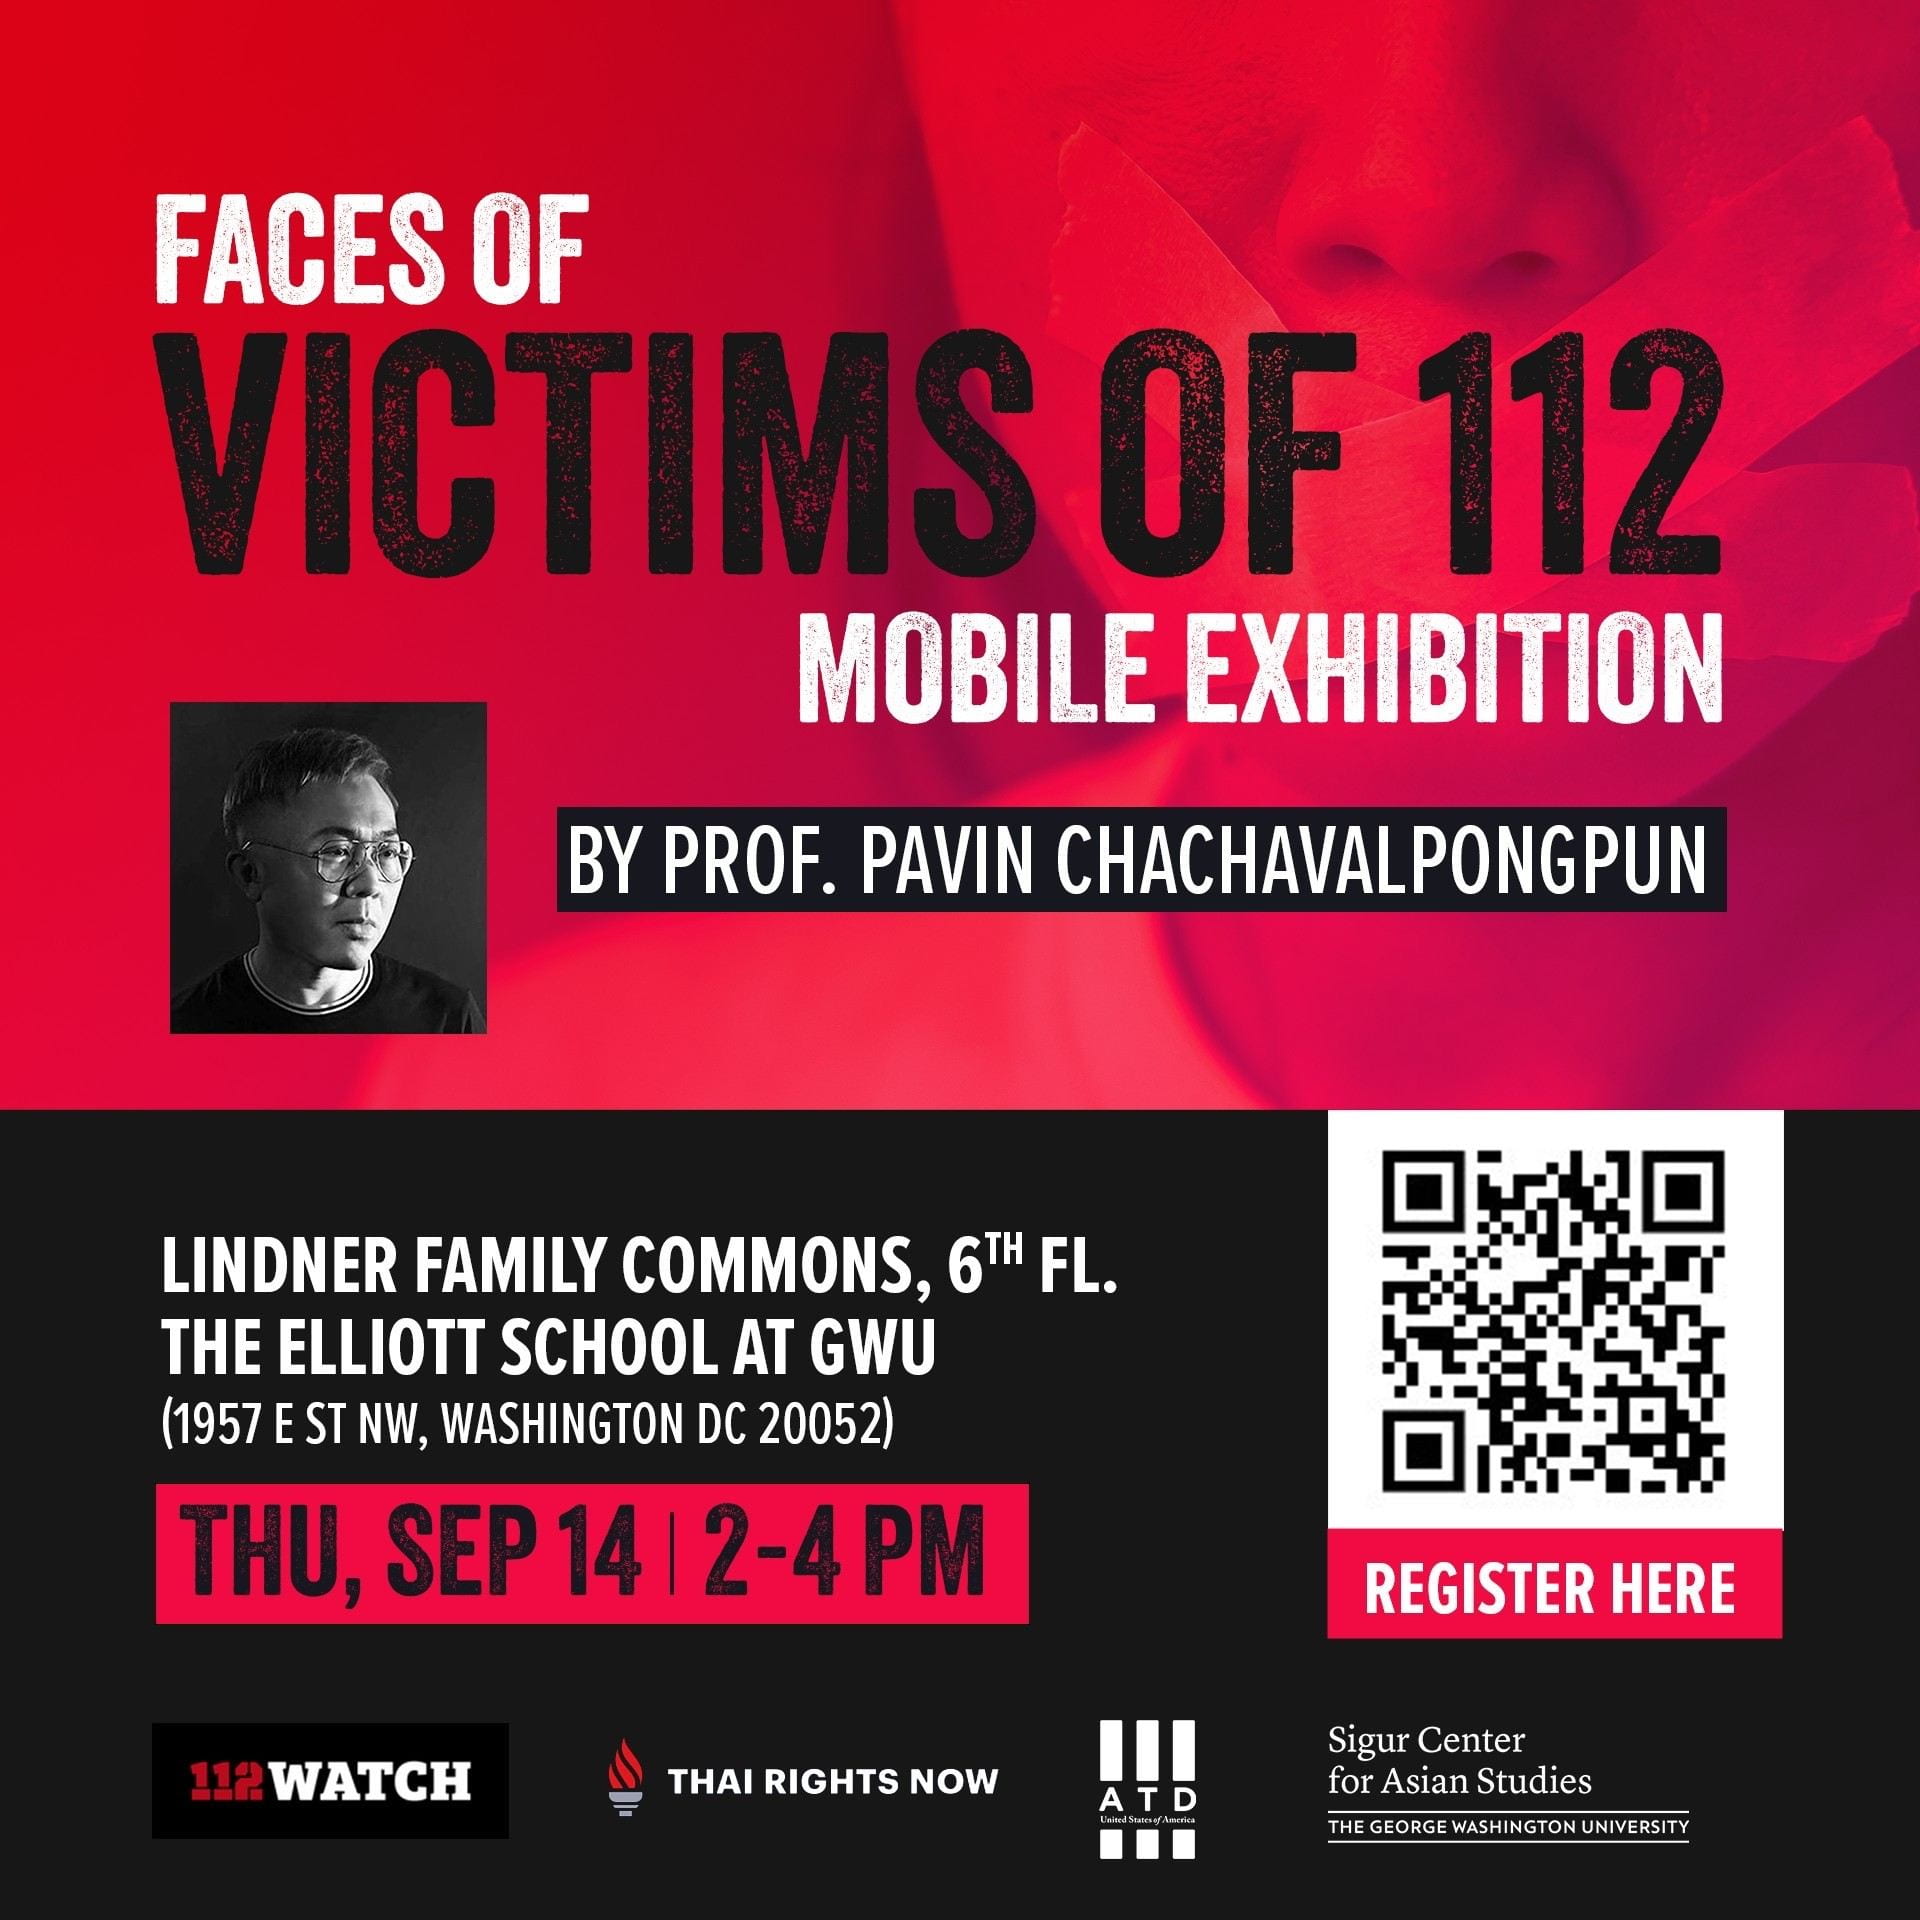 The graphic for Faces of Victims 112